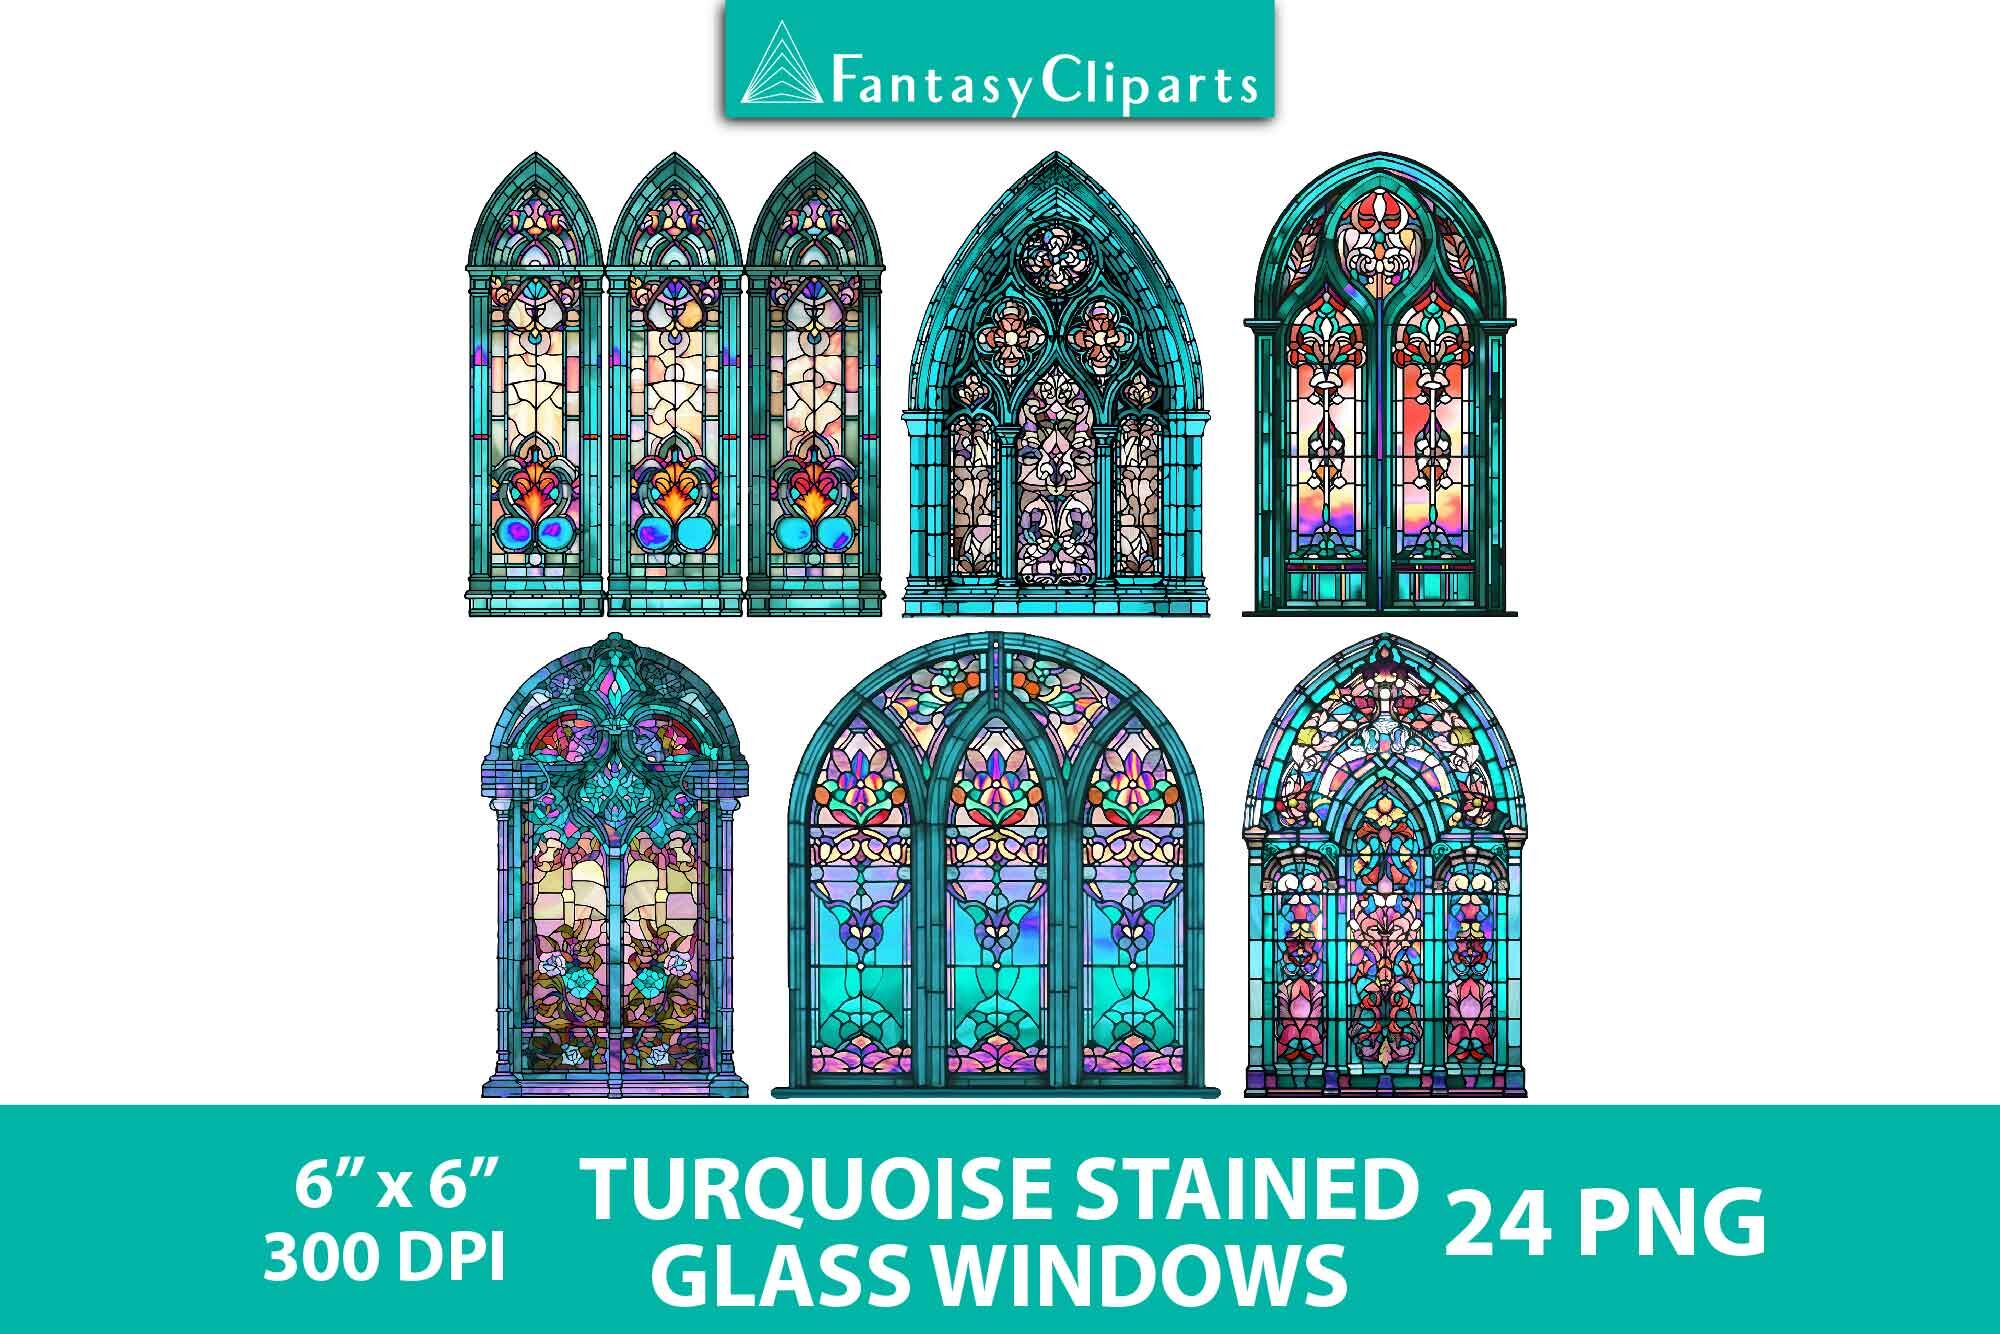 stained glass window clipart